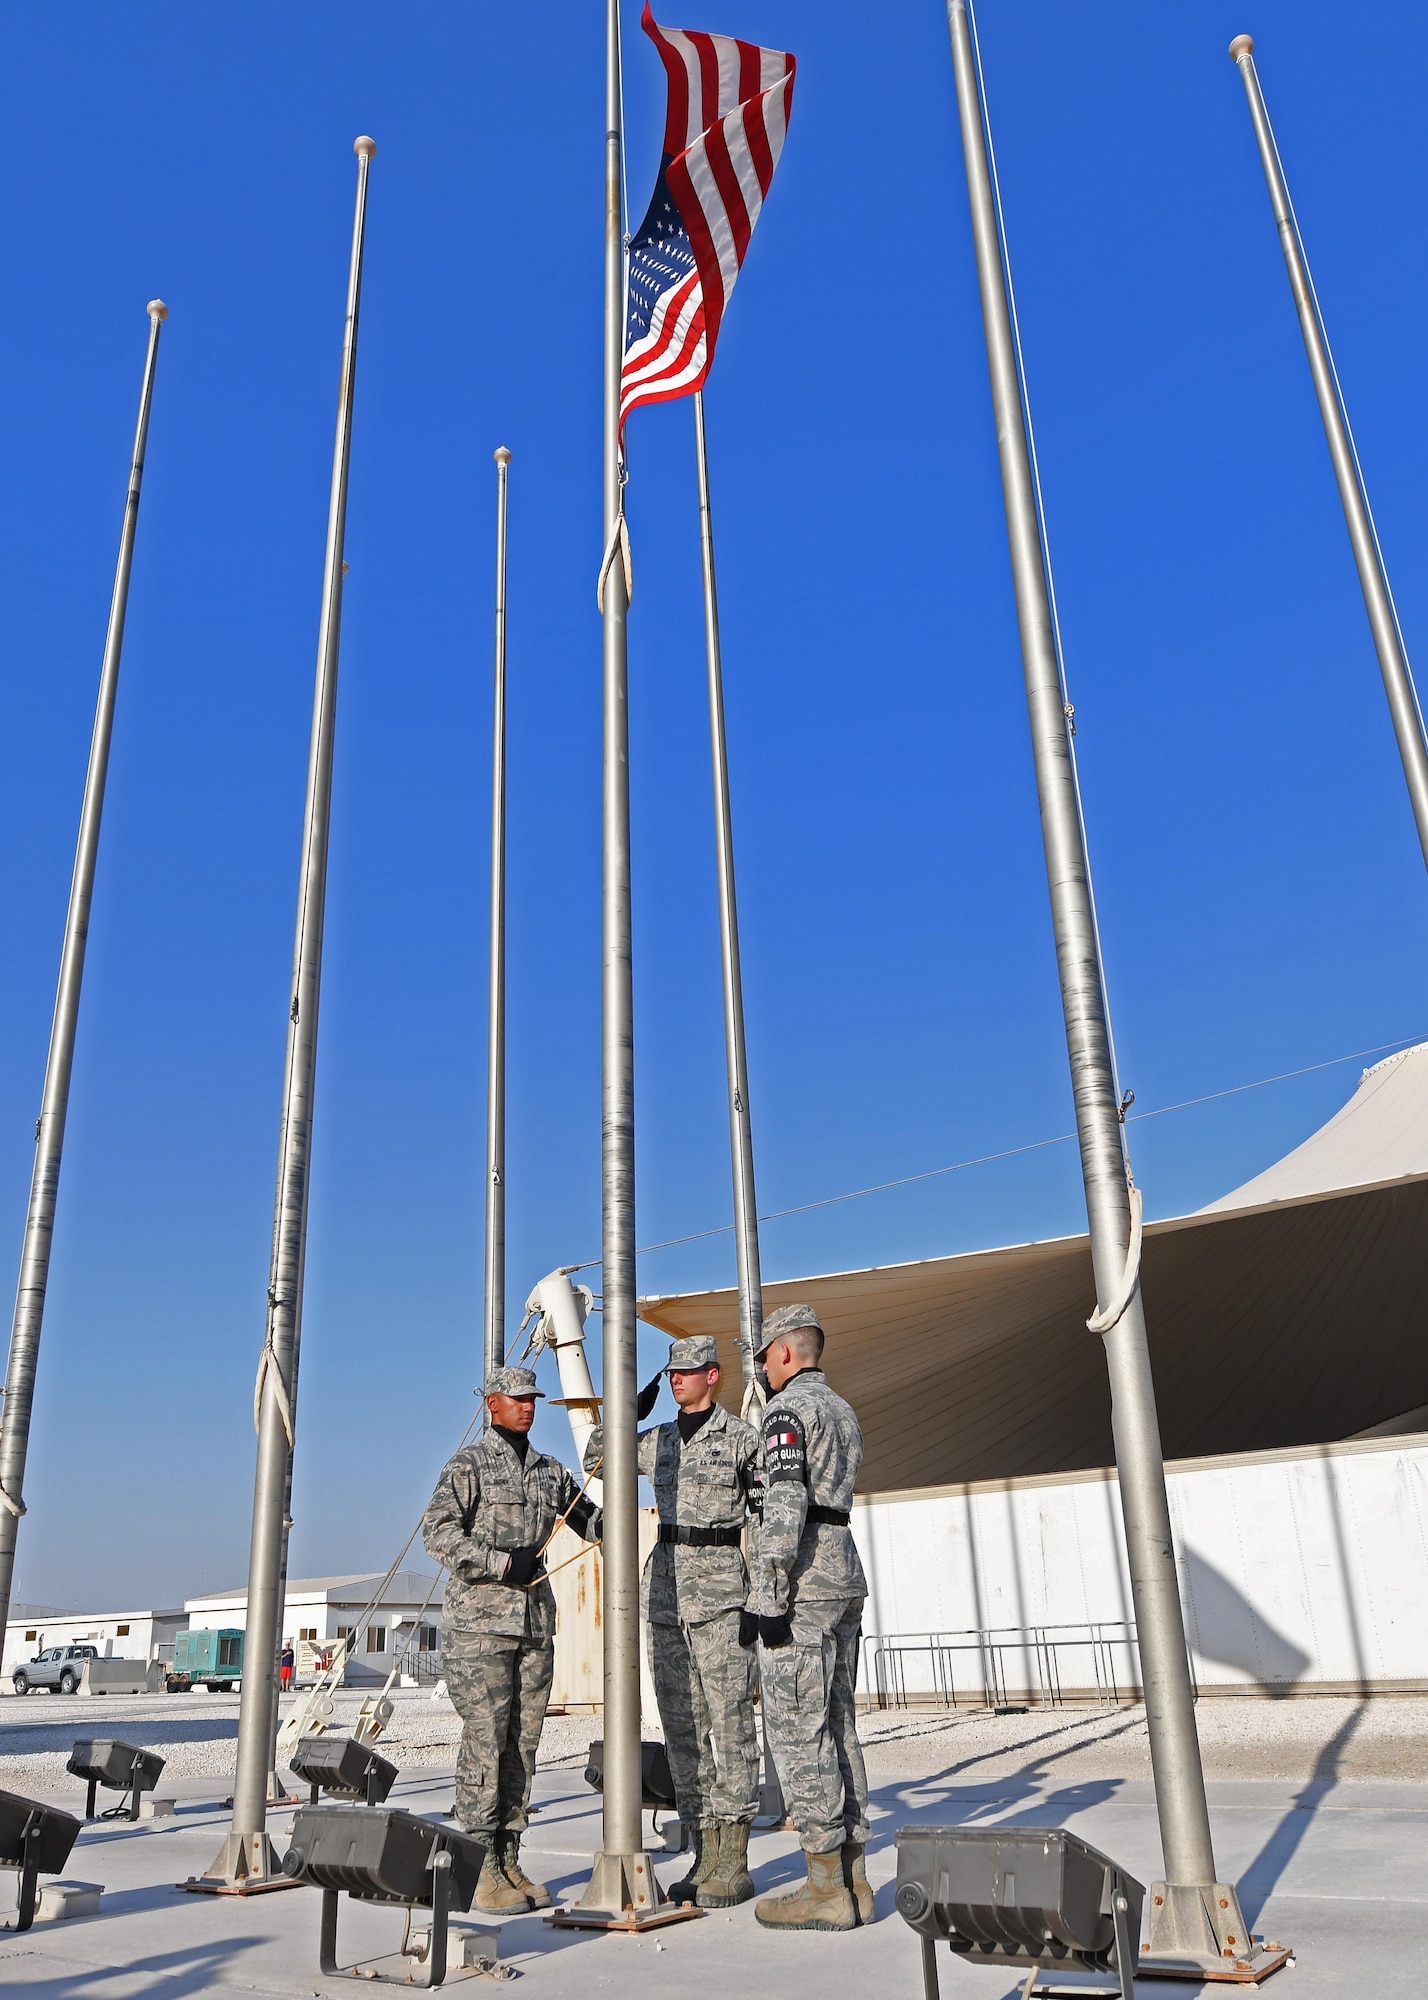 The base Honor Guard lowers the U.S. flag during a Veterans Day retreat ceremony held at Al Udeid Air Base, Qatar, Nov. 11, 2016. The colors were retired in honor of all U.S. veterans, both past and present. (U.S. Air Force photo by Senior Airman Miles Wilson)